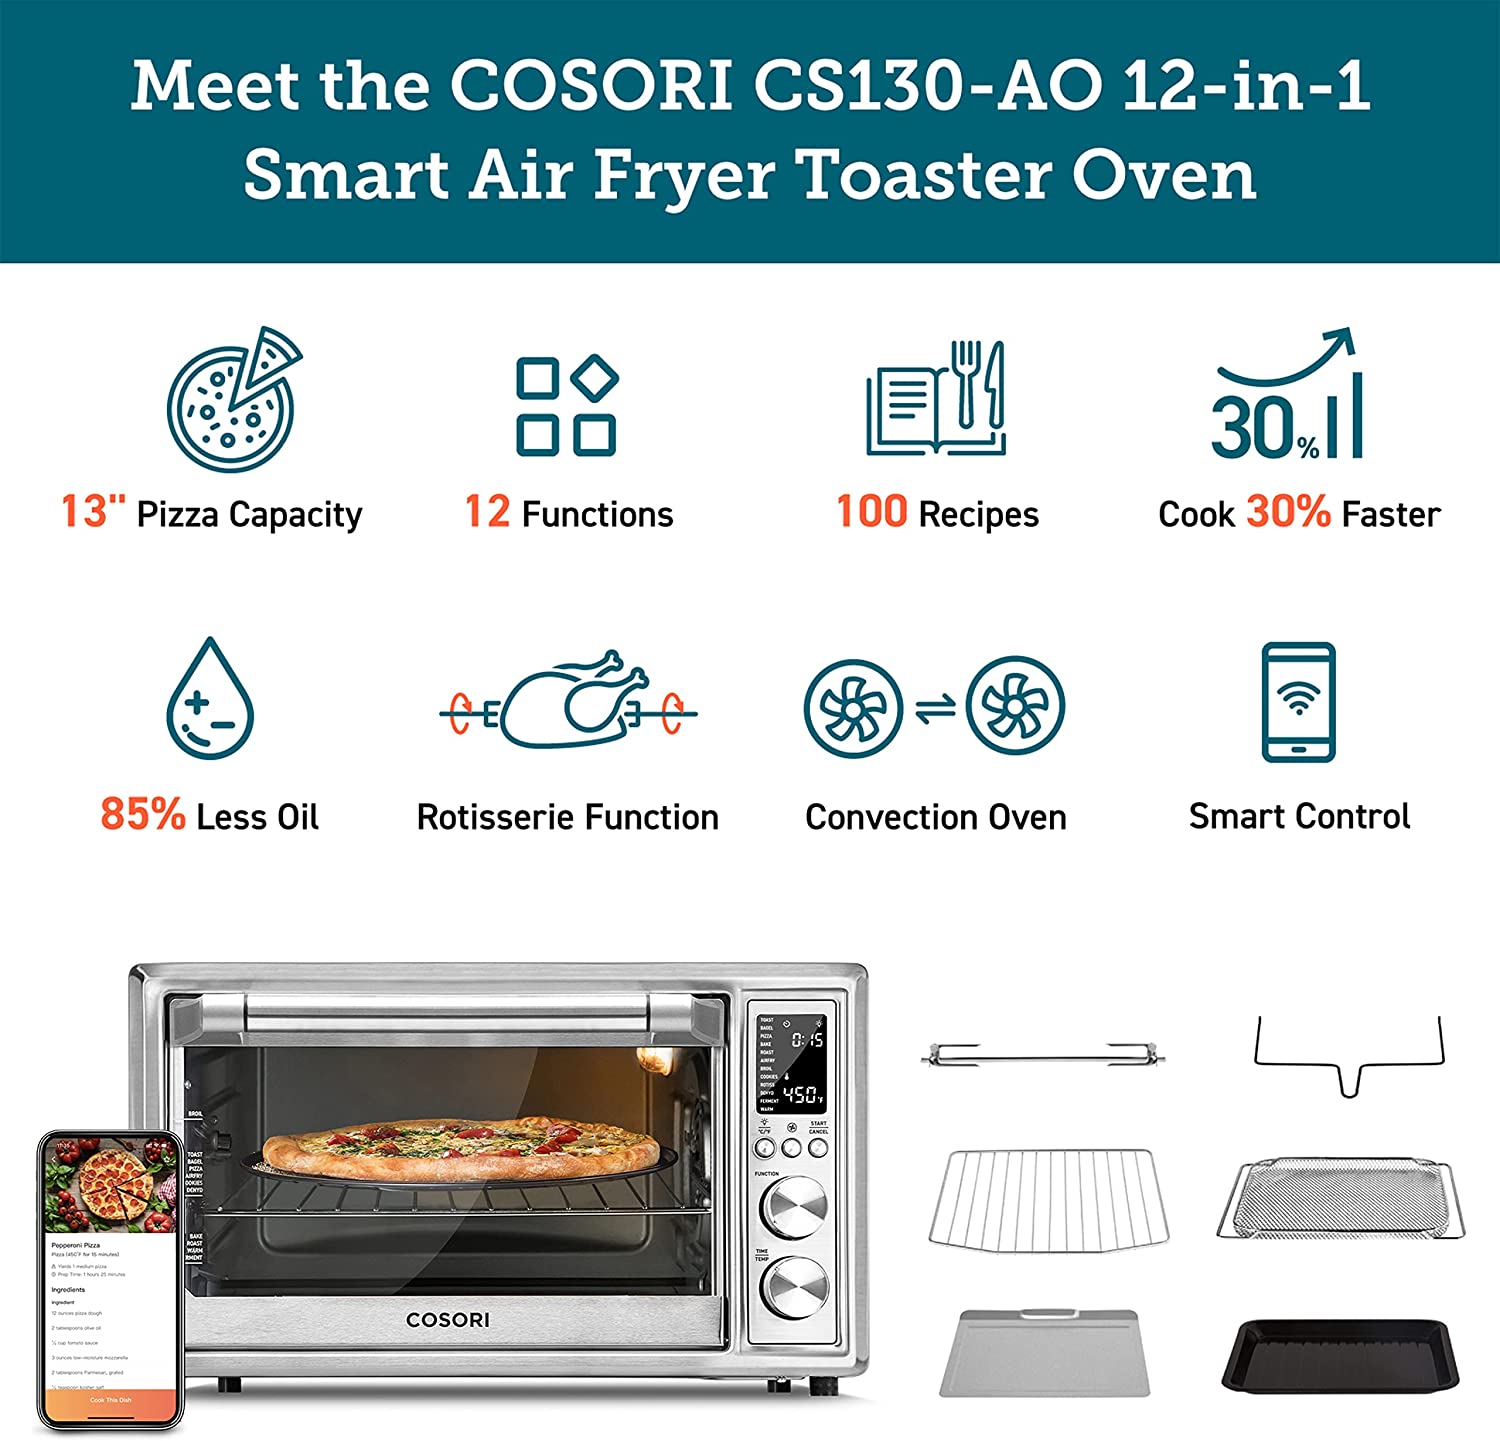 COSORI Air Fryer Toaster Oven Combo, 12-in-1 Convection Ovens Countertop, Stainless Steel, Smart, 6-Slice Toast, 12-inch Pizza, with Bake, Roast, Broil, 75 Recipes&Accessories Tray, Basket, 26.4QT